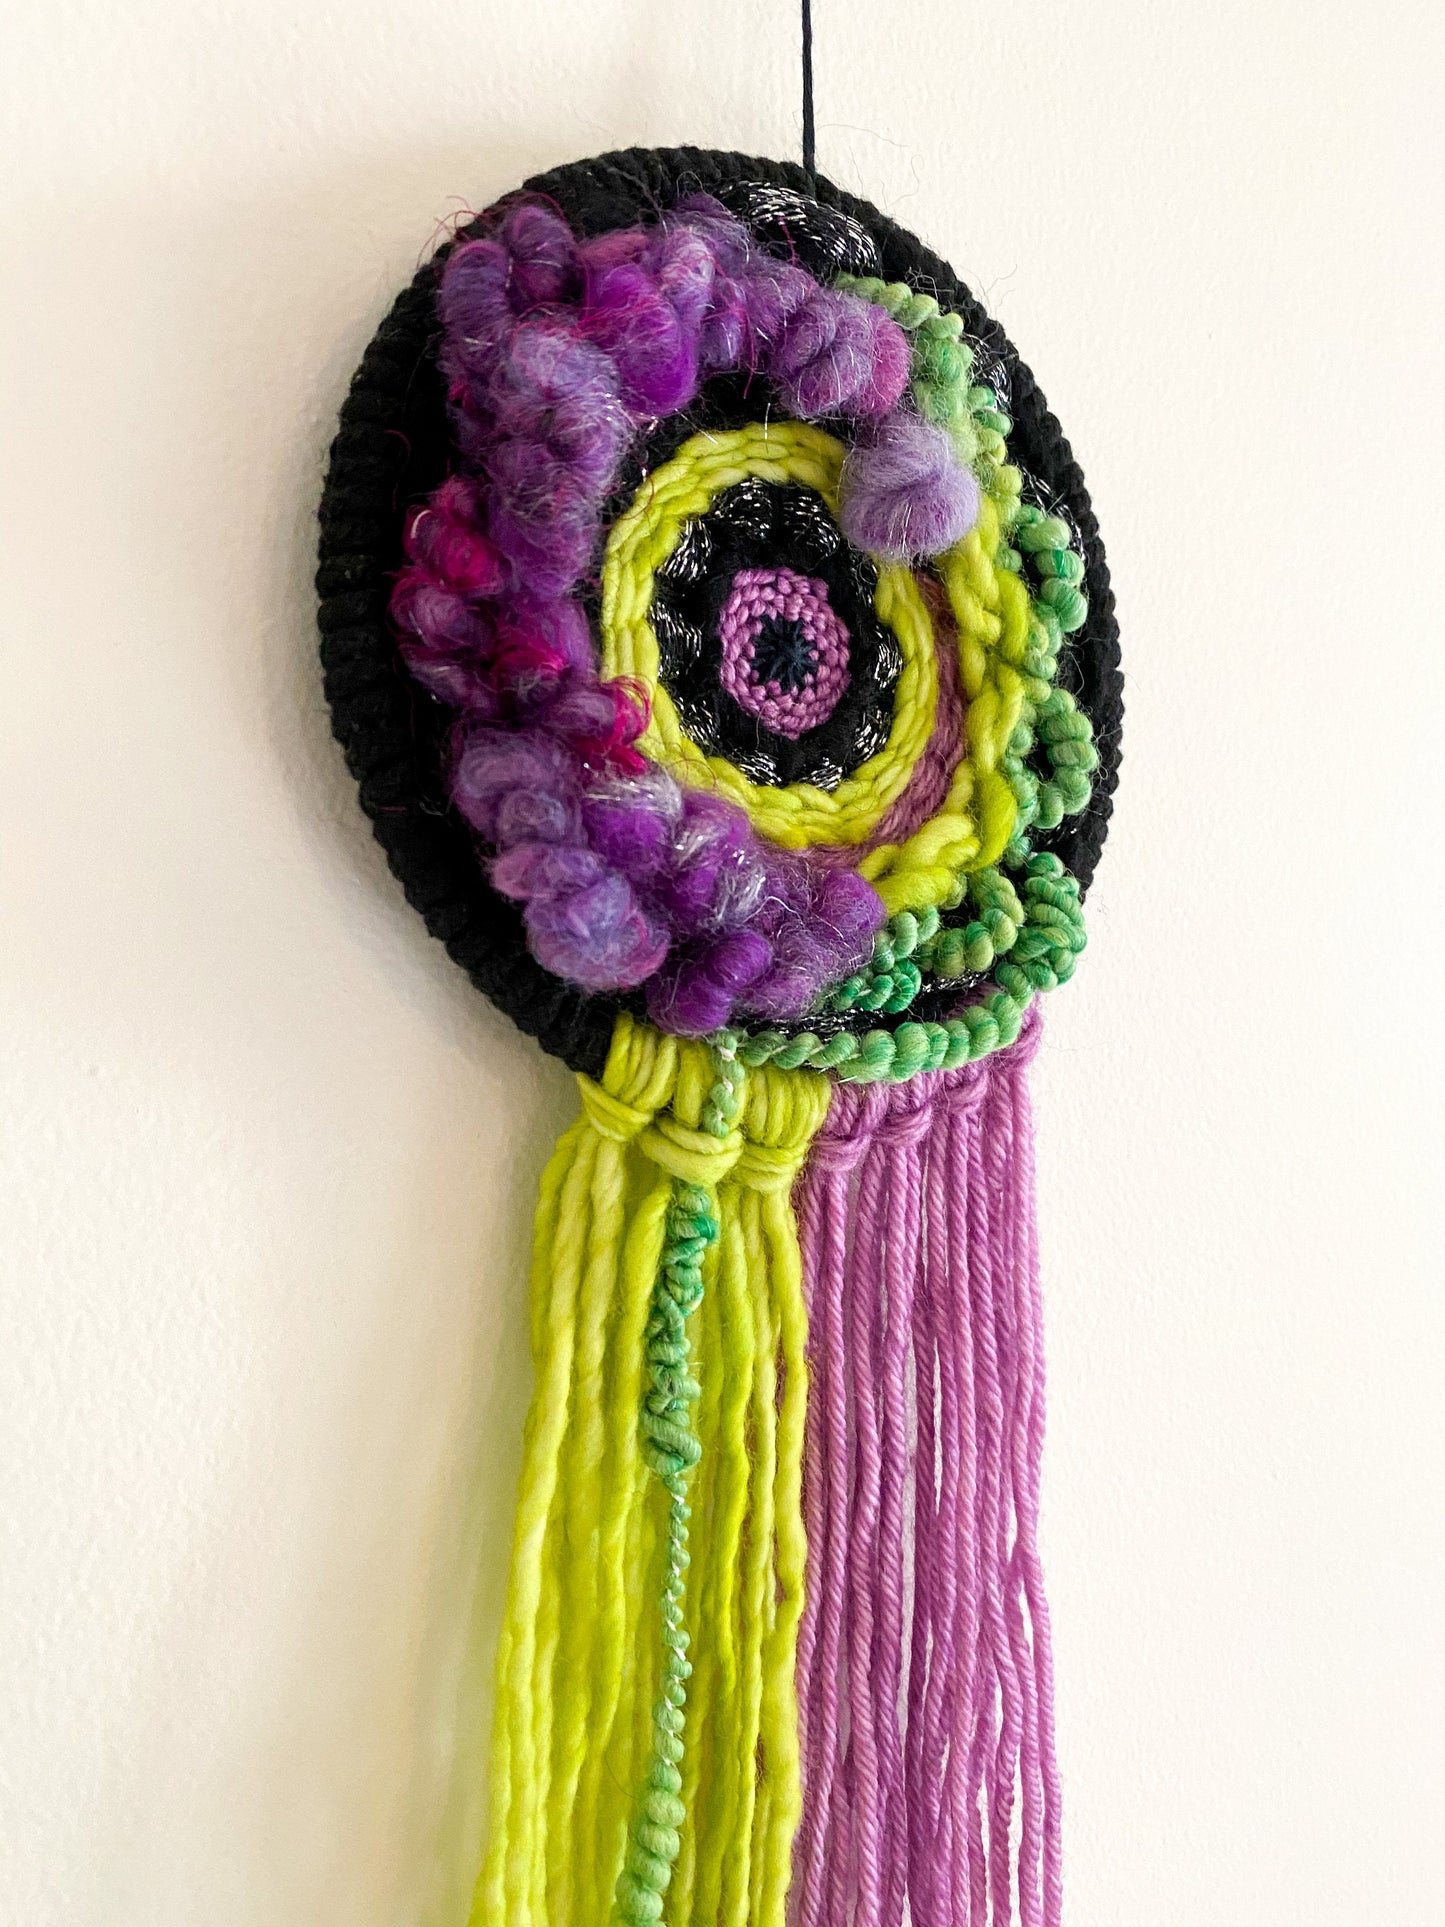 Electric Purple and Green - Woven Wall Hanging